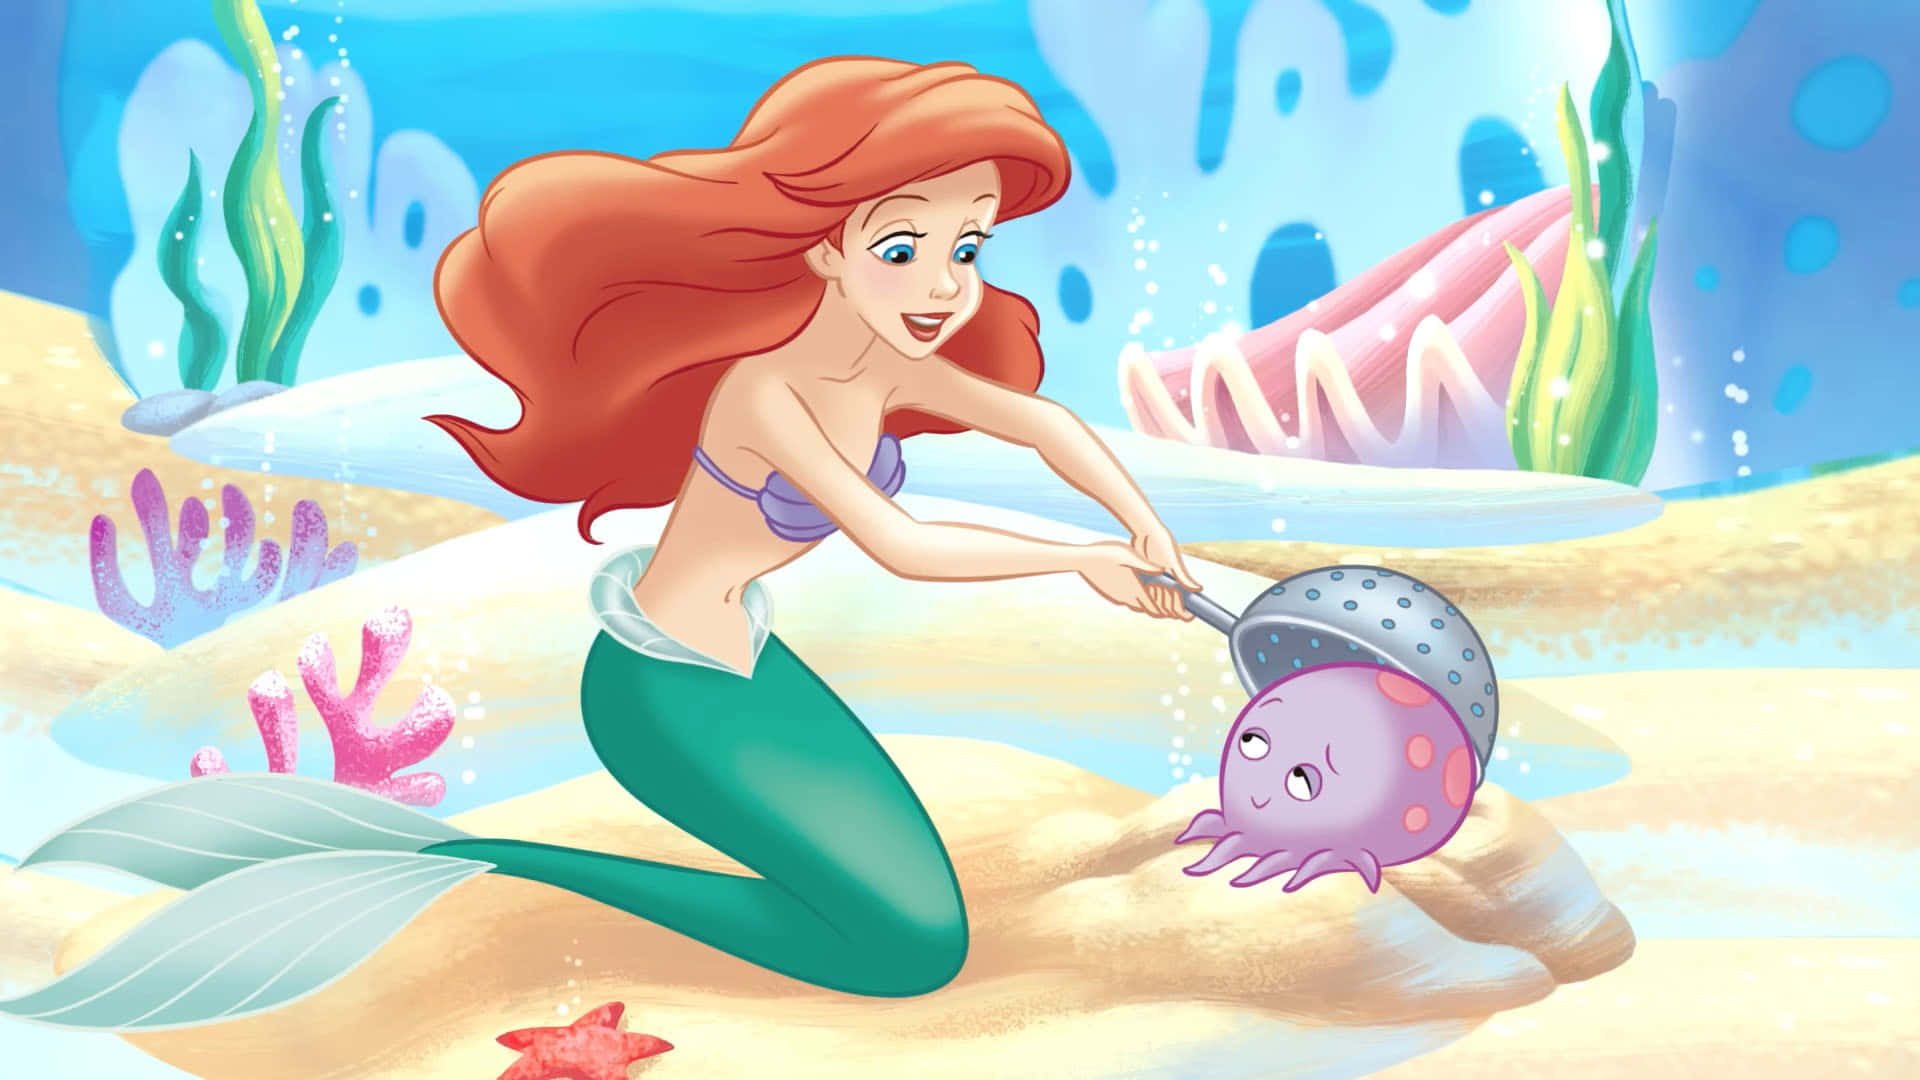 Explore the world with Ariel!